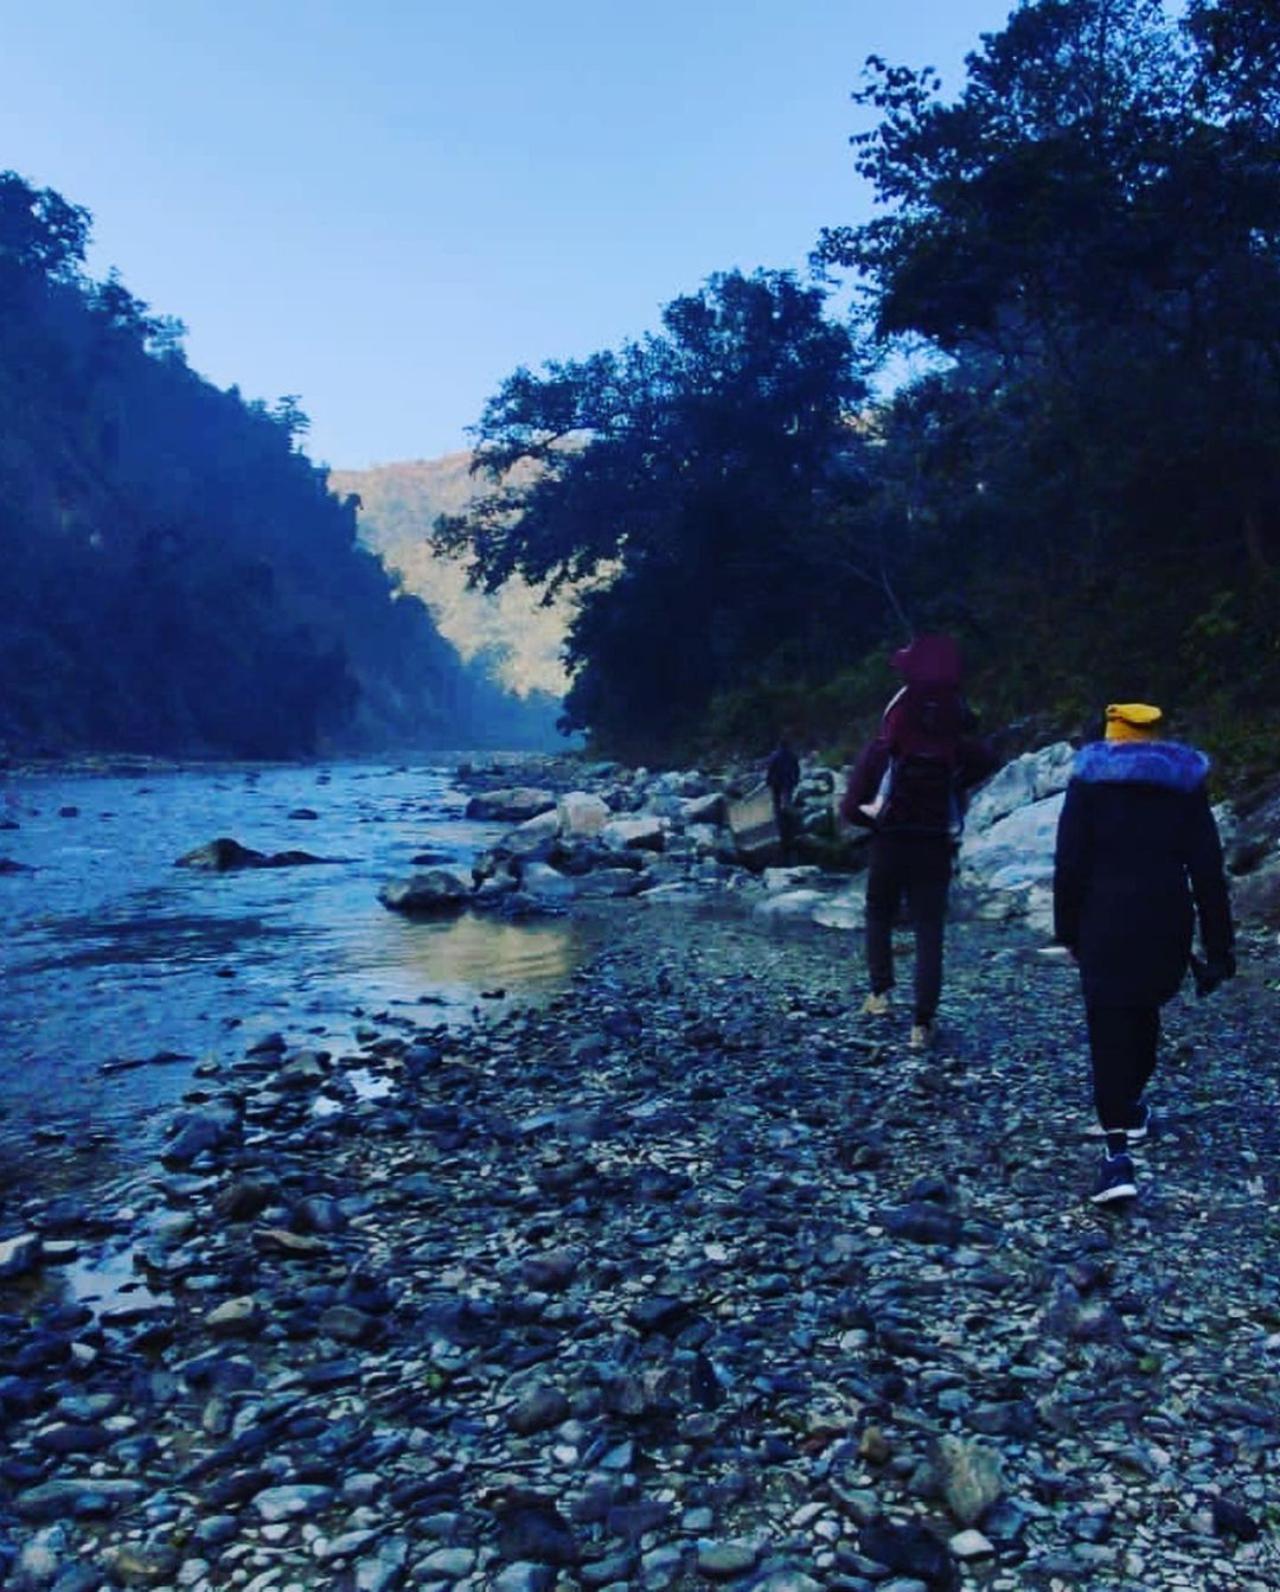 Apart from posting pictures of Virat and Vamika, the actor also shared a picturesque photo of a flowing river and mountains. In one of the photos, the trio can be seen walking alongside a rocky river bank. 